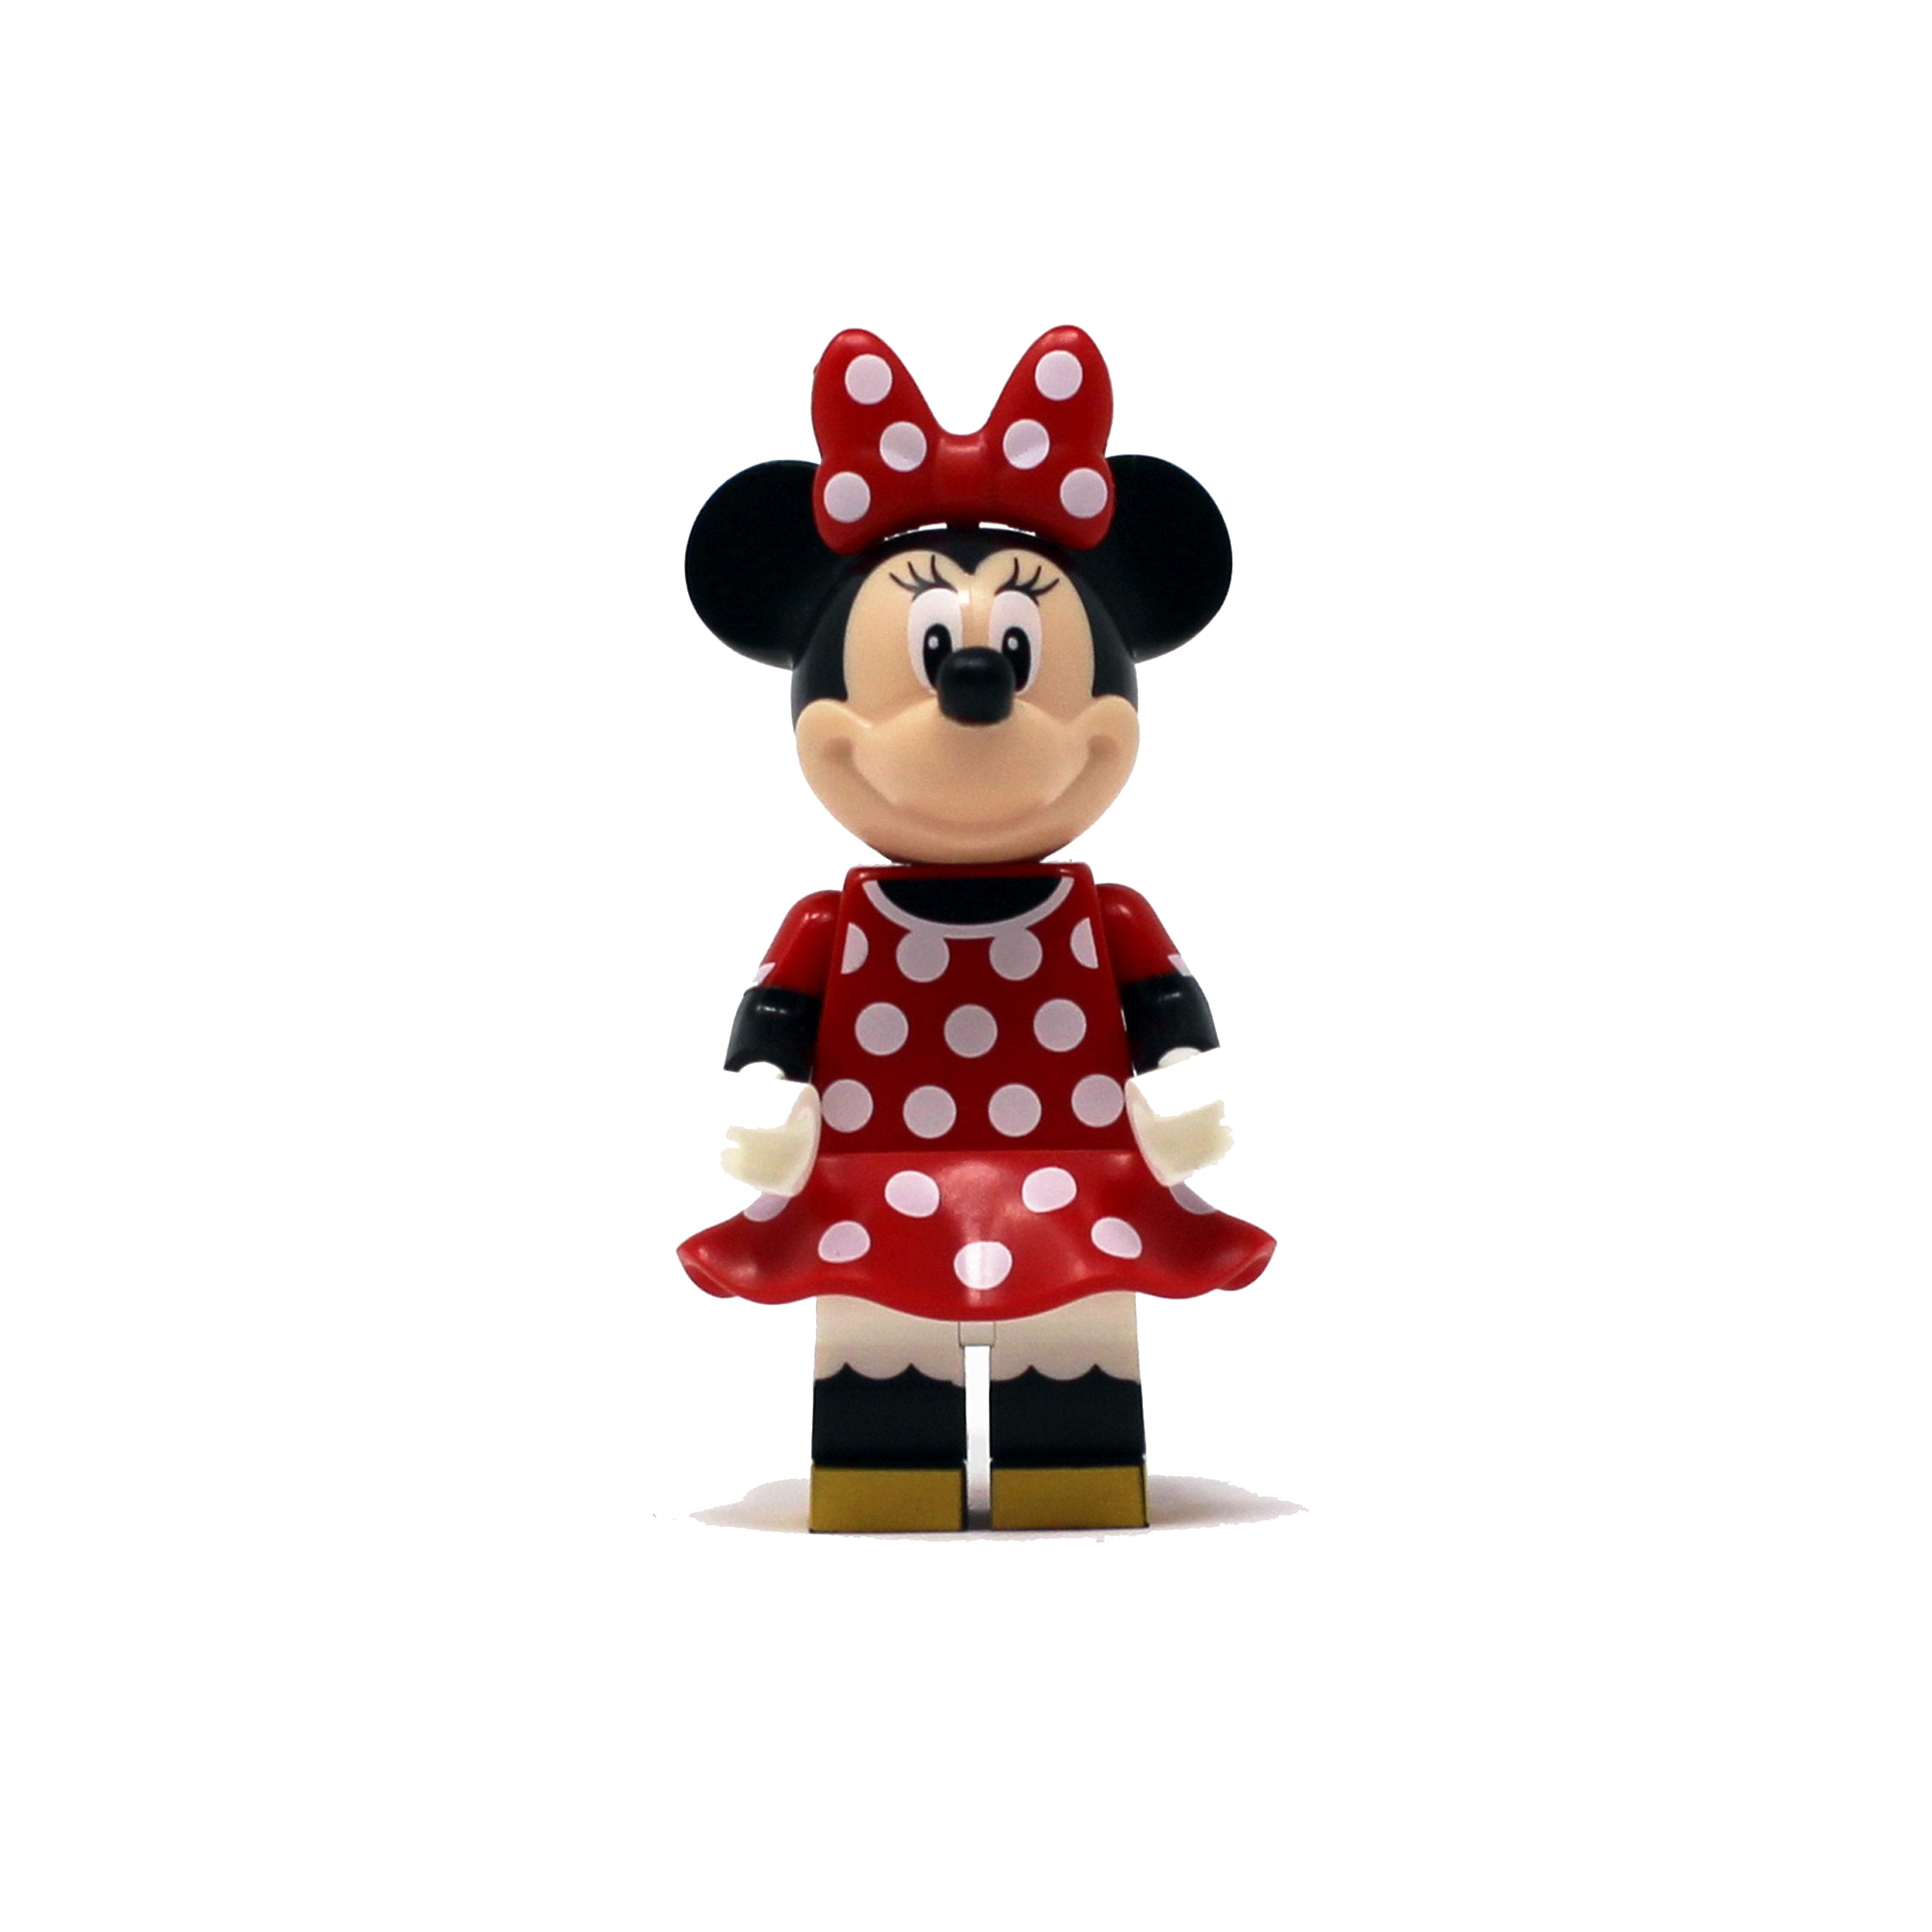 Minnie Mouse (red polka dot outfit, plastic skirt)